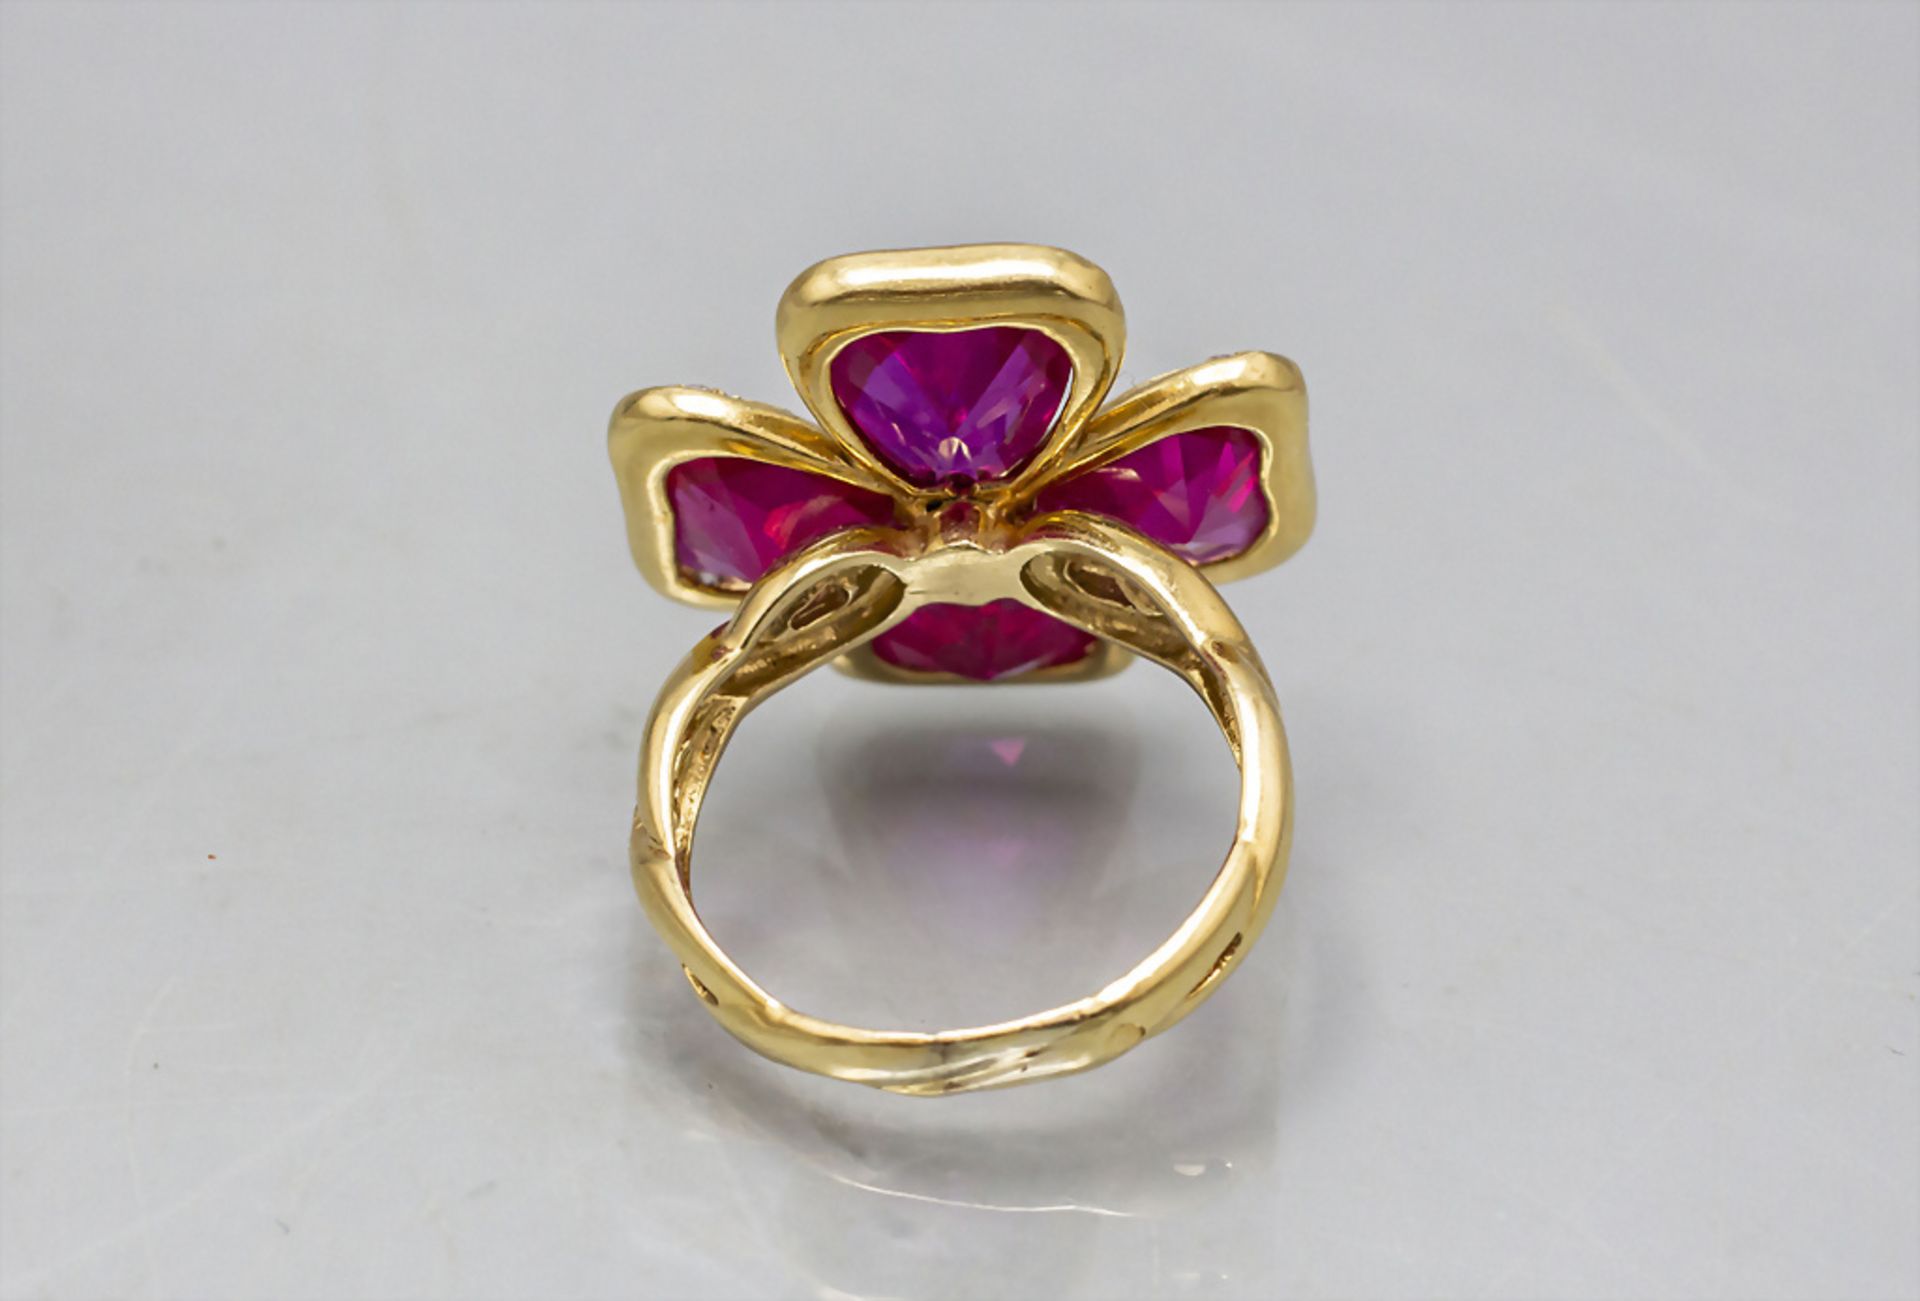 Damenring mit großer Blüte / A ladies 14 ct gold ring with a blossom, 2. Hälfte 20. Jh. - Bild 3 aus 3